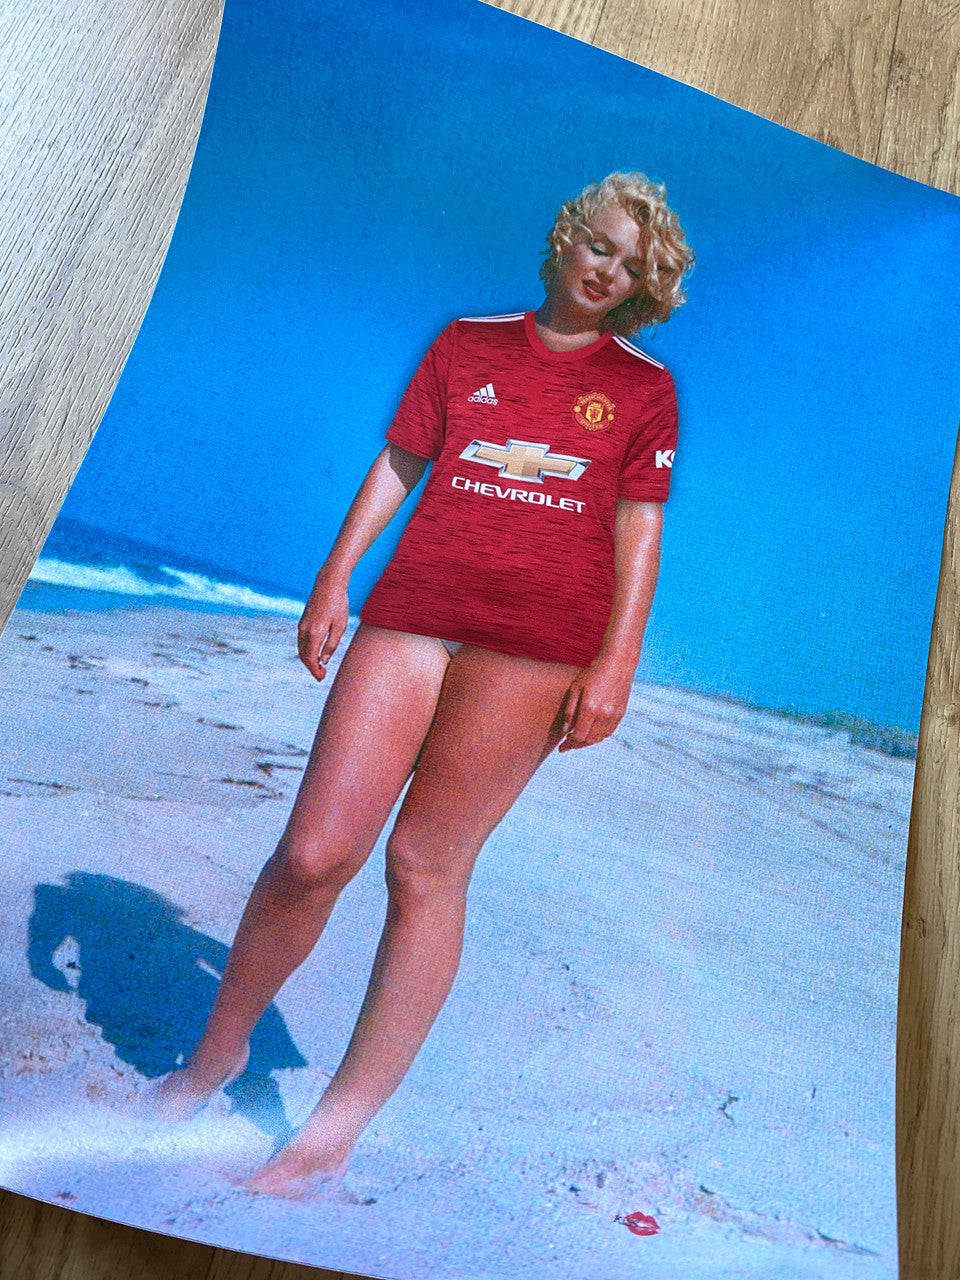 Custom Marilyn Monroe Football KiSS Canvas or Poster - Personalised, unique jersey - Pick any team - Football soccer - Gift Idea